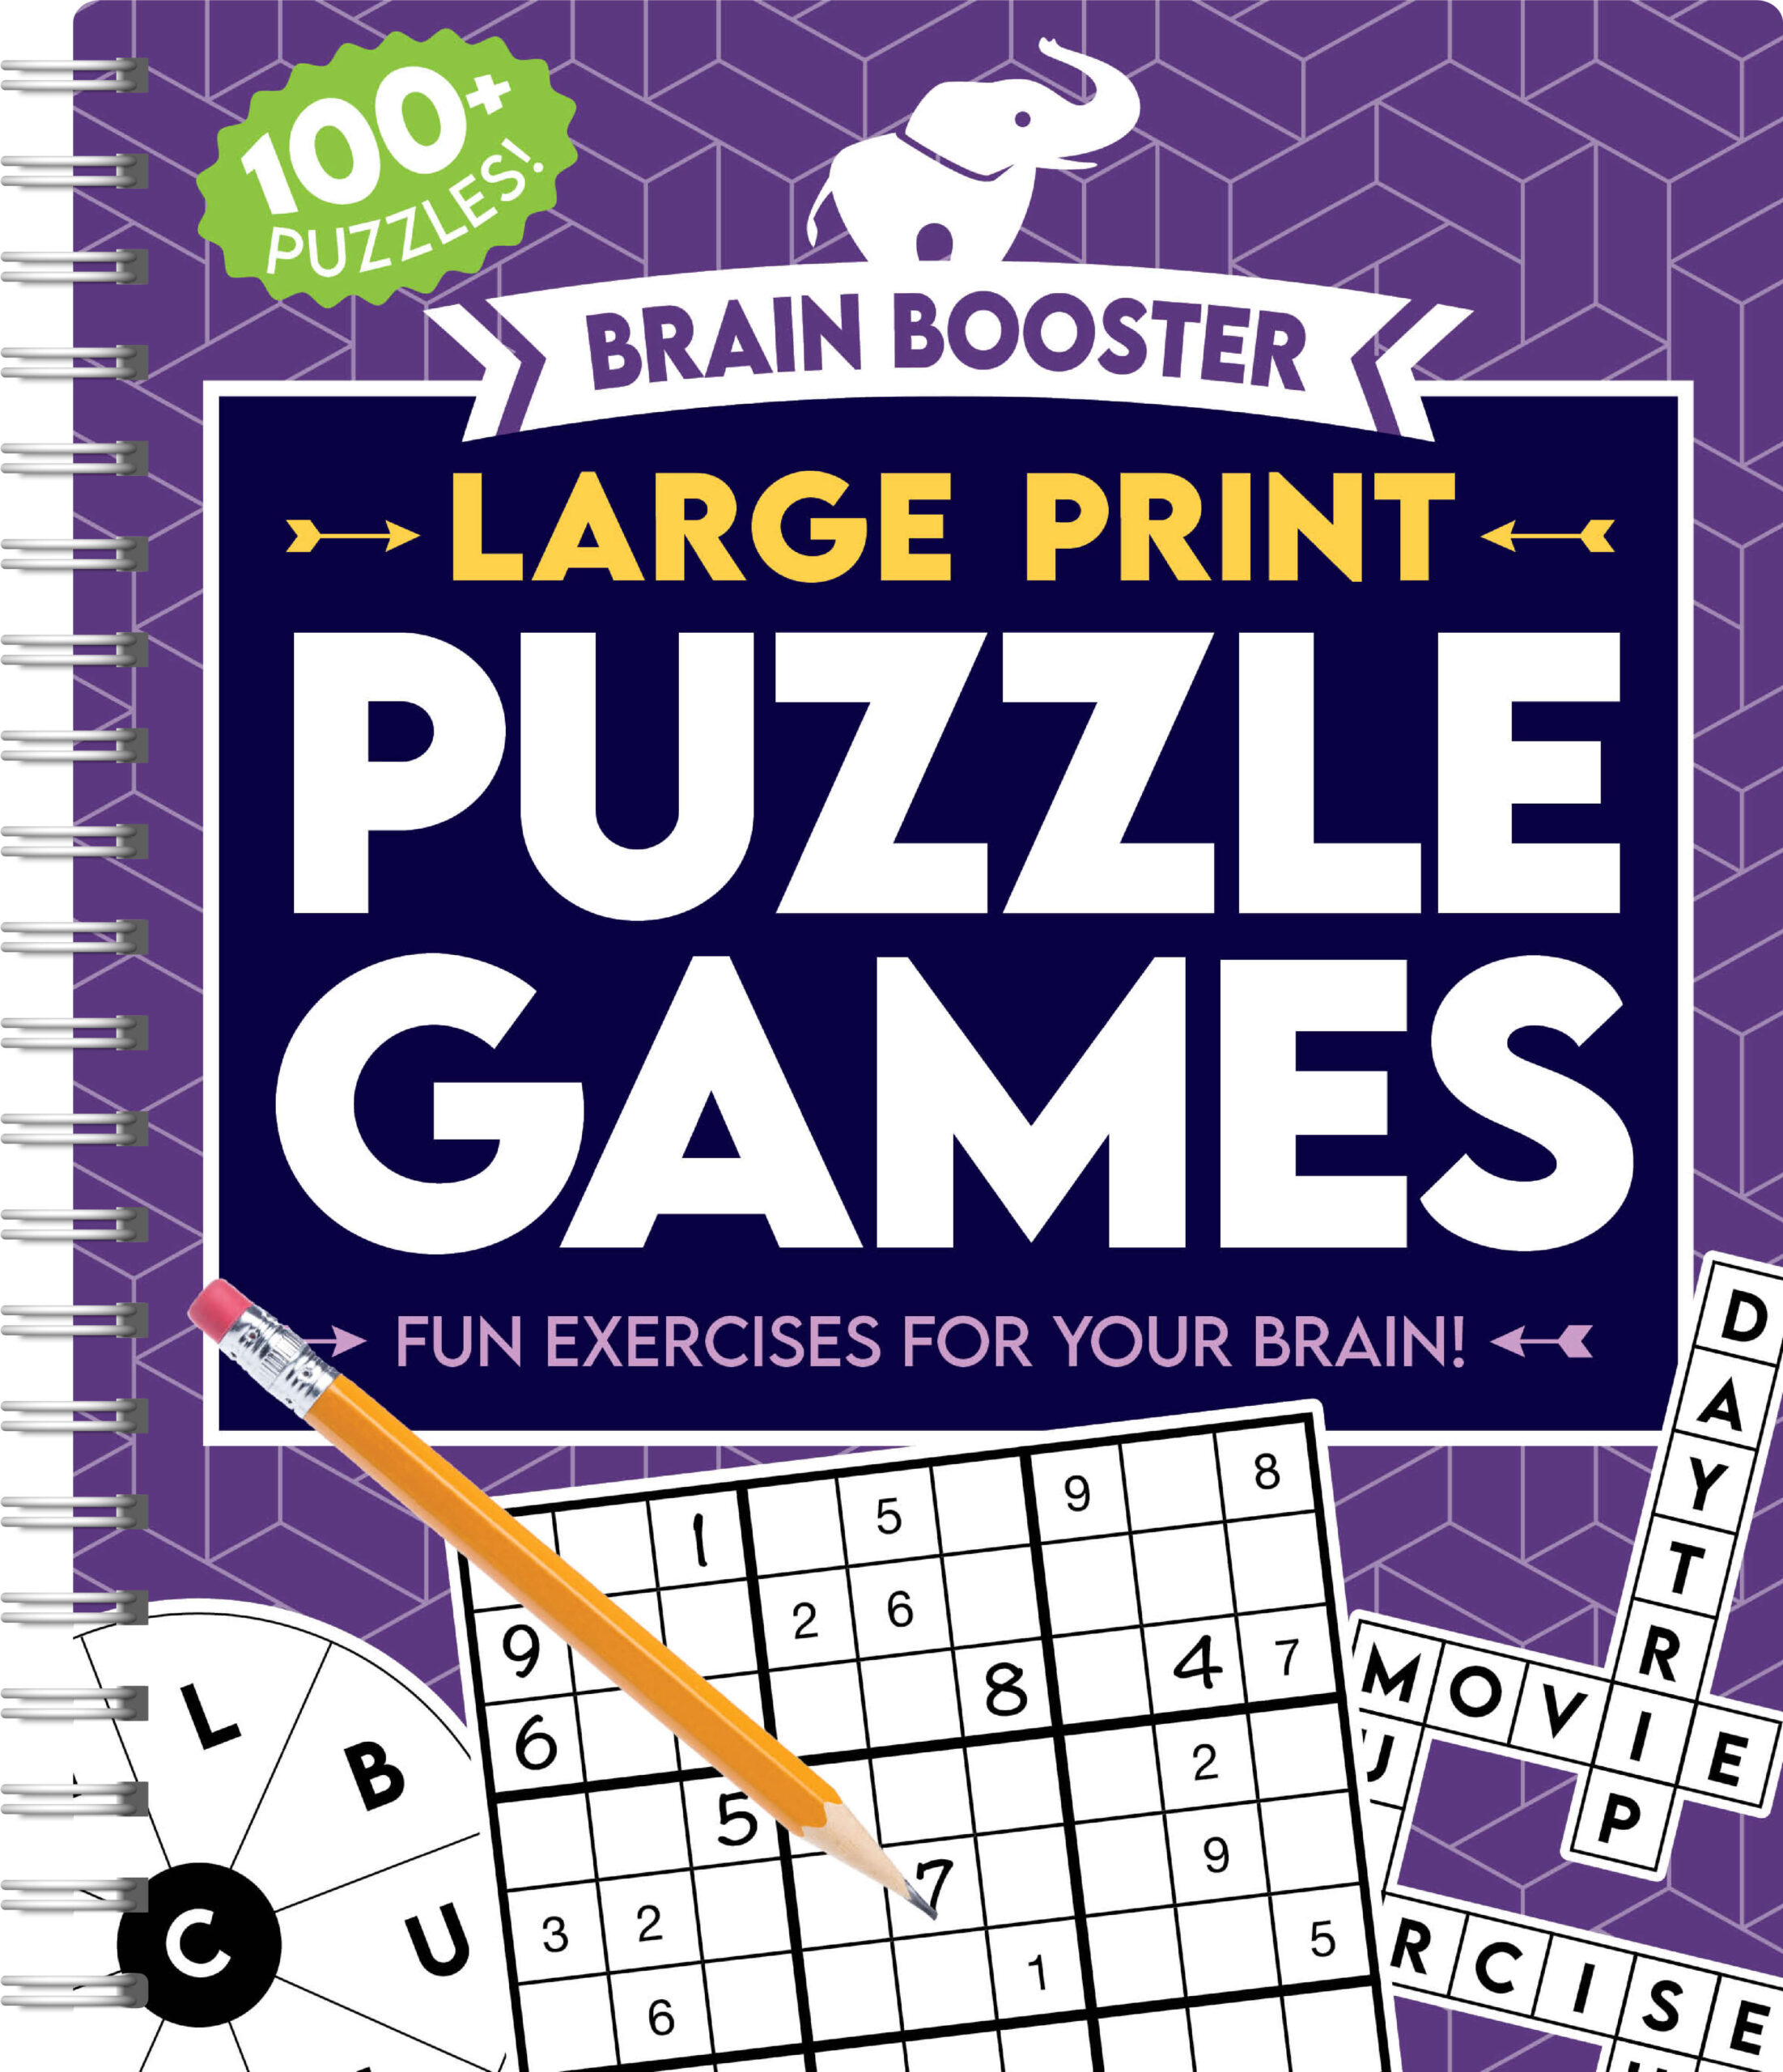 Brain Booster: Large Print Puzzle Games